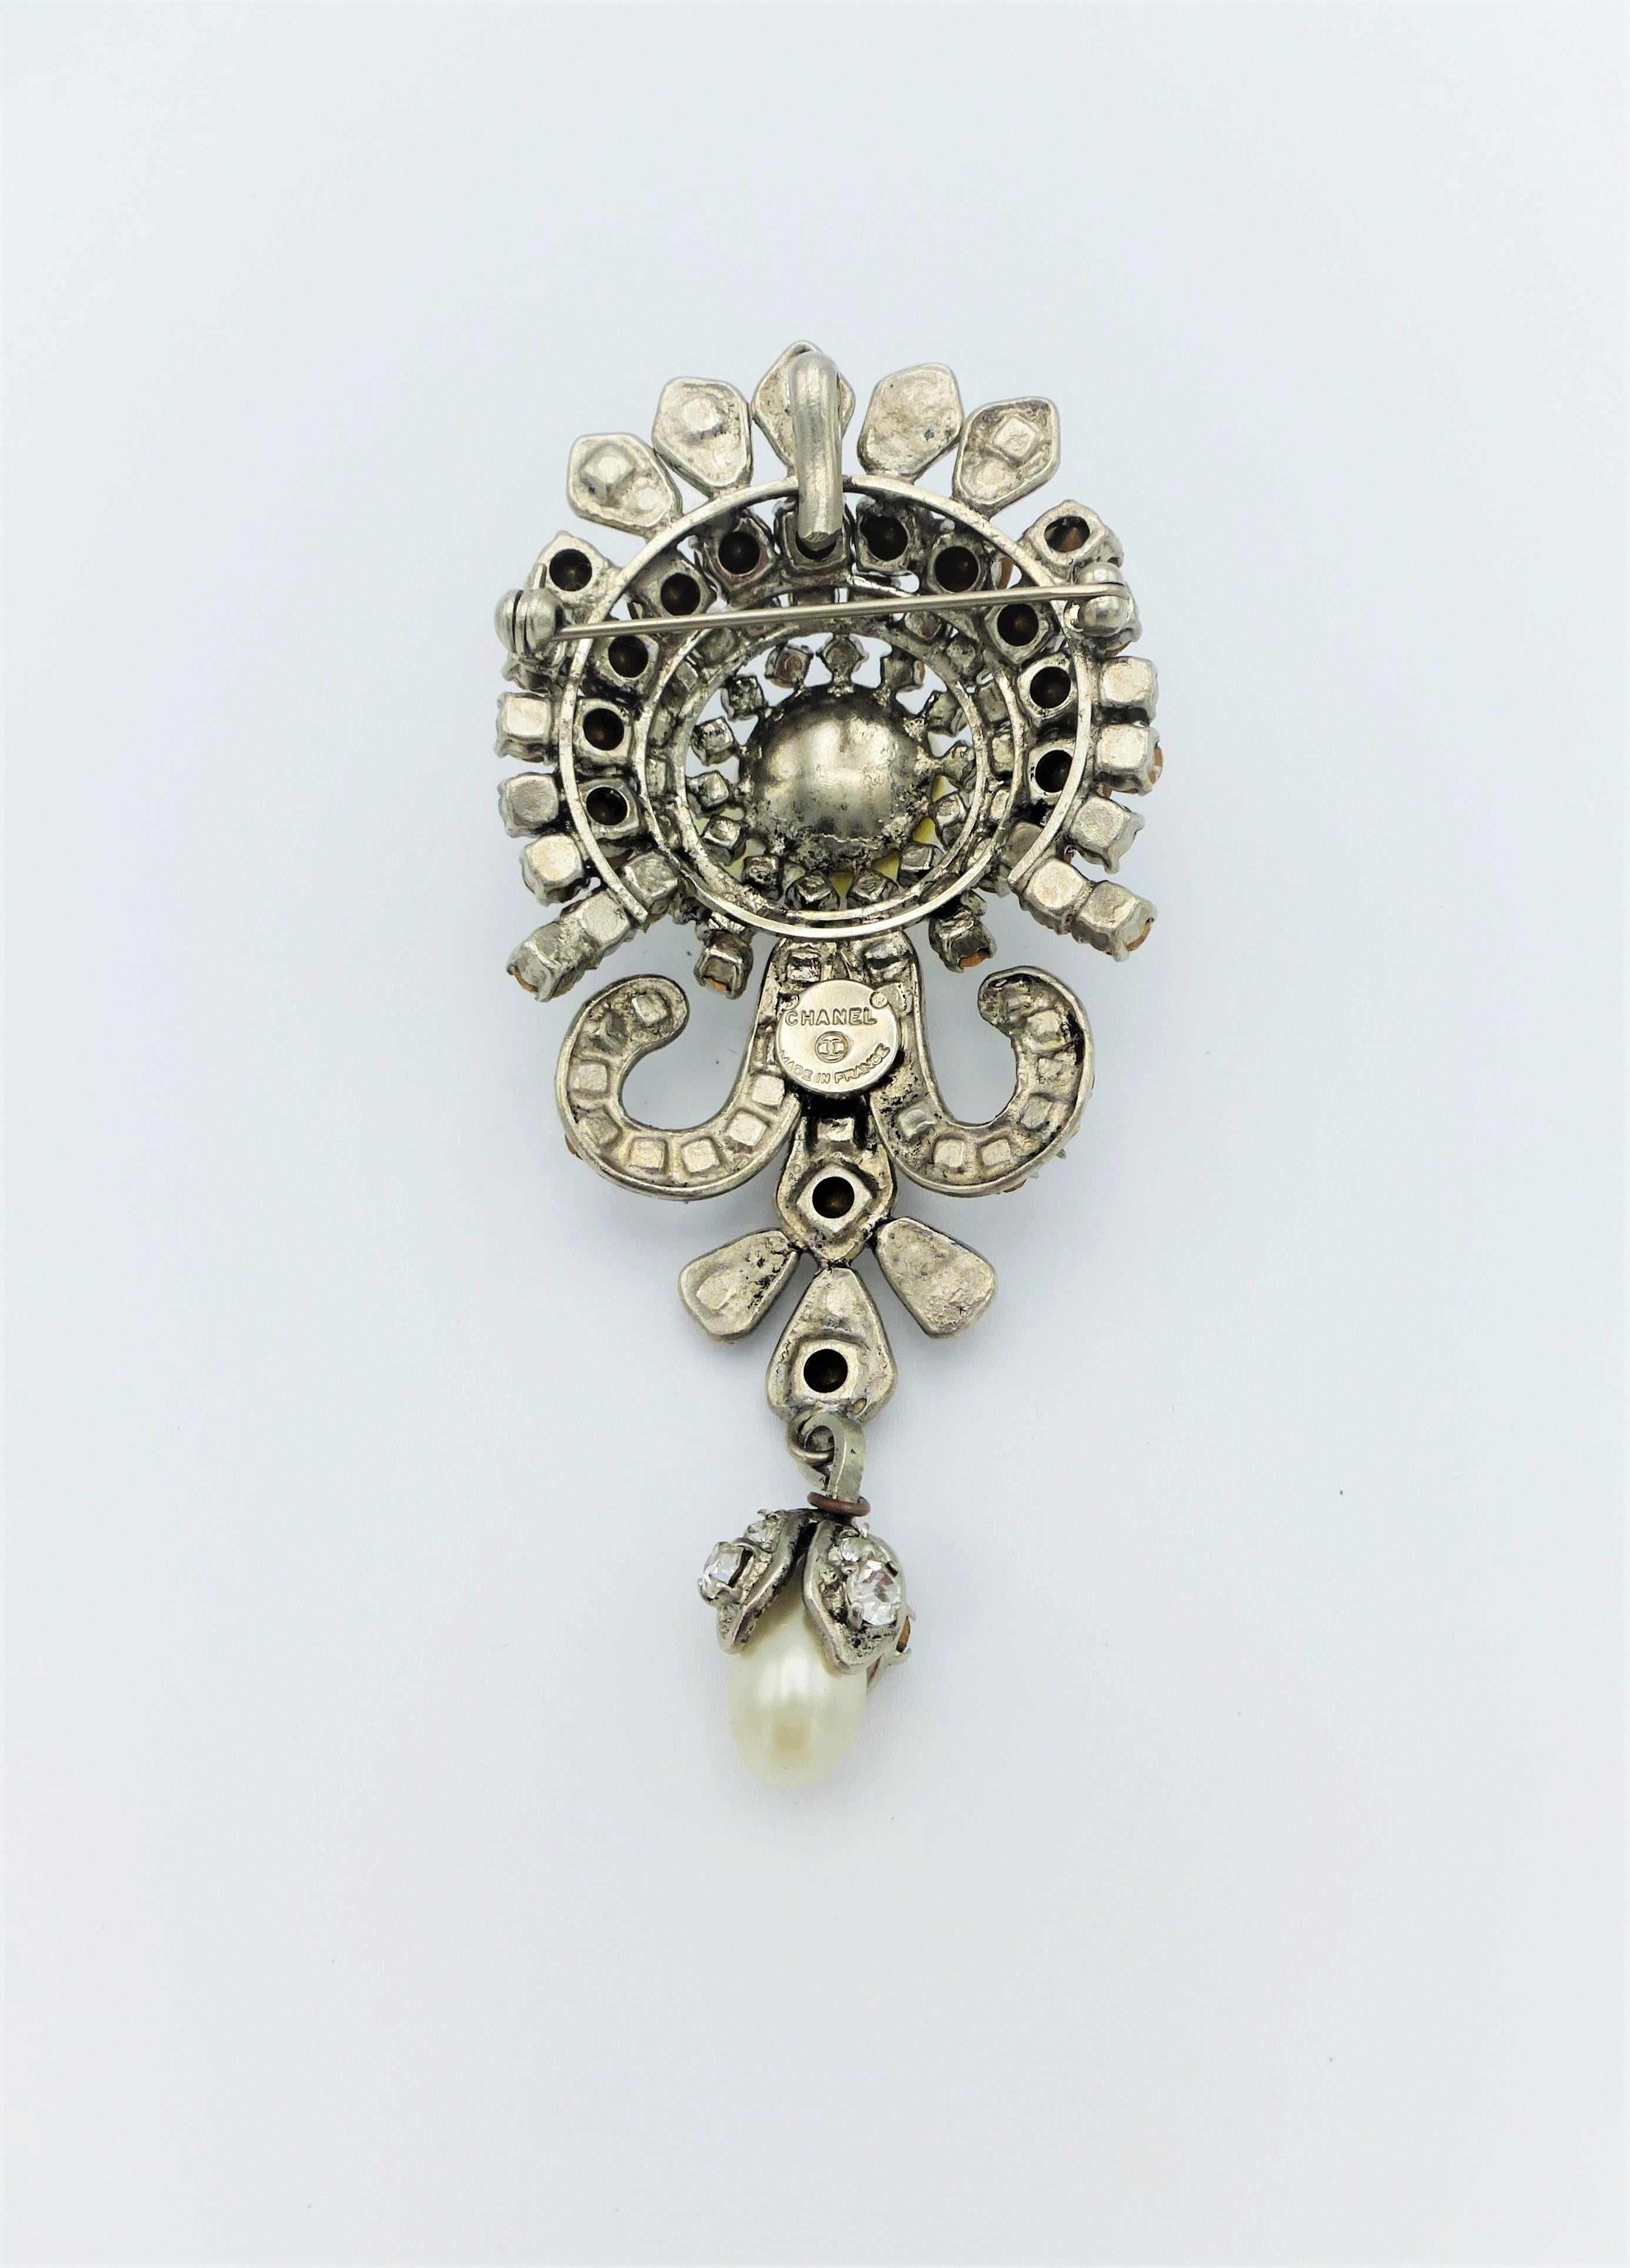 About
Very elegant Chanel brooch made of rhodium plated metal  and set with many rhinestones and 2 handcrafted beads.  A small moving pearl drop is attached.
Measurement: 
Length 9 cm (3,5 inches) 
Width    4 cm  (1,55 inches) 
High     2 cm  (1,8